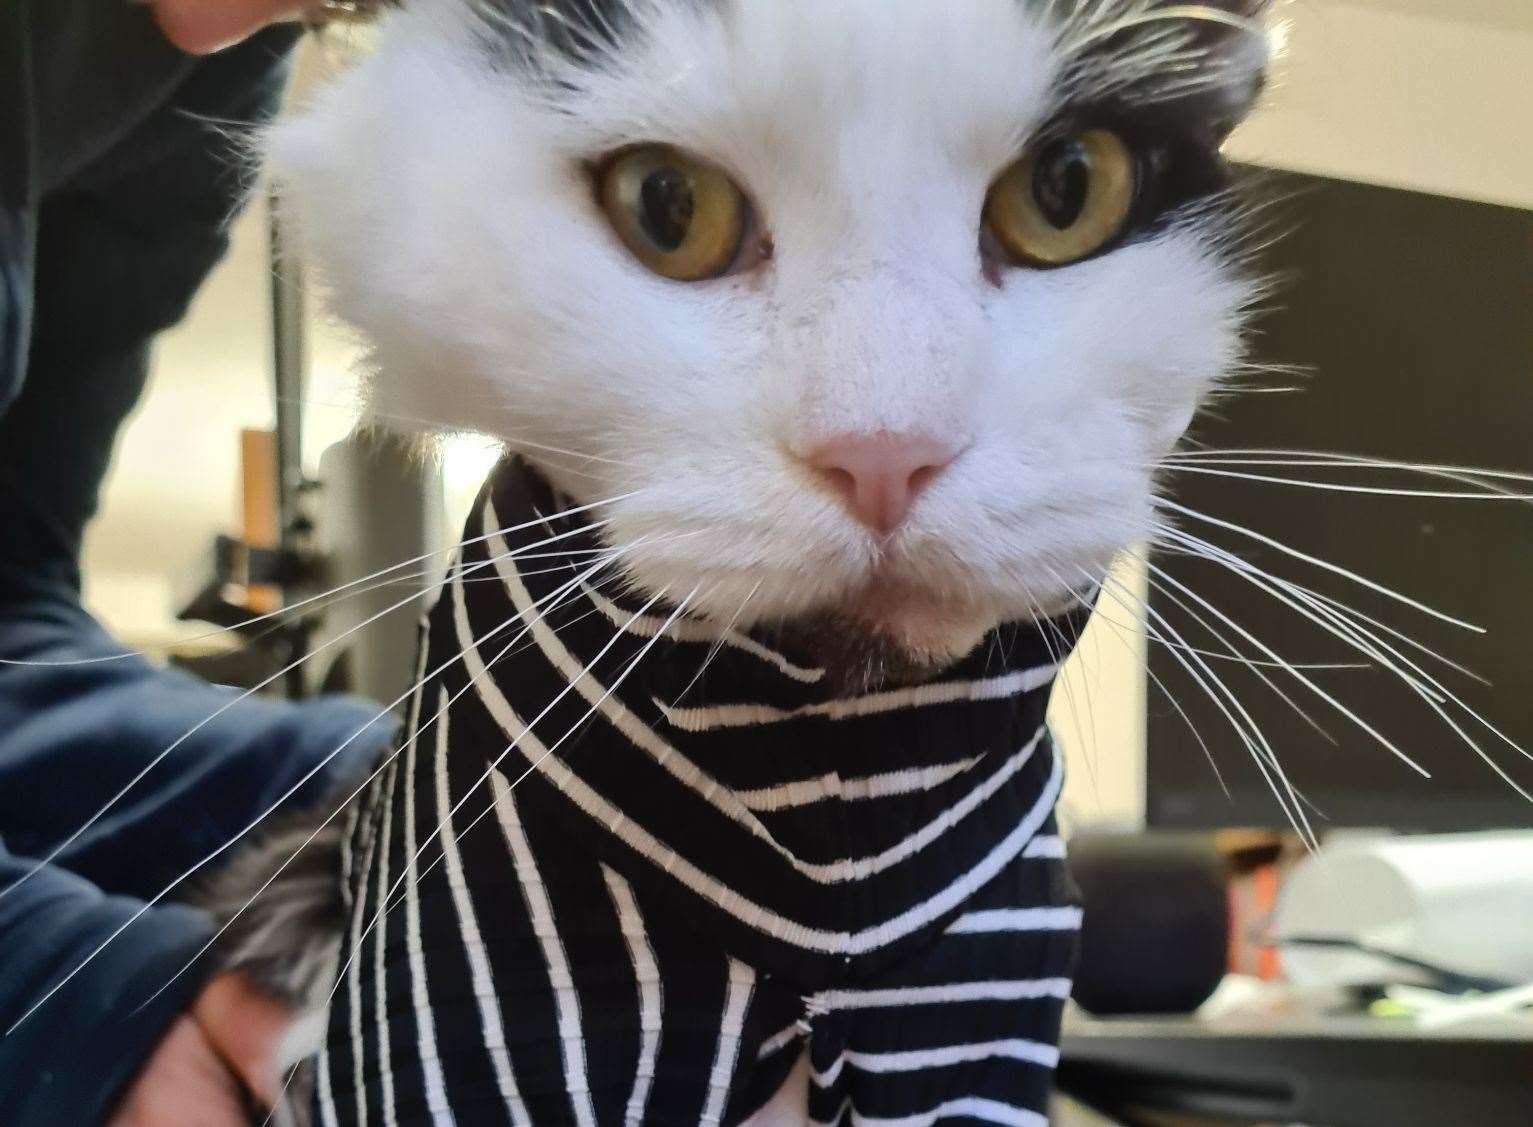 Jack Sparrow the cat in his pirate themed outfit. Picture: RSPCA